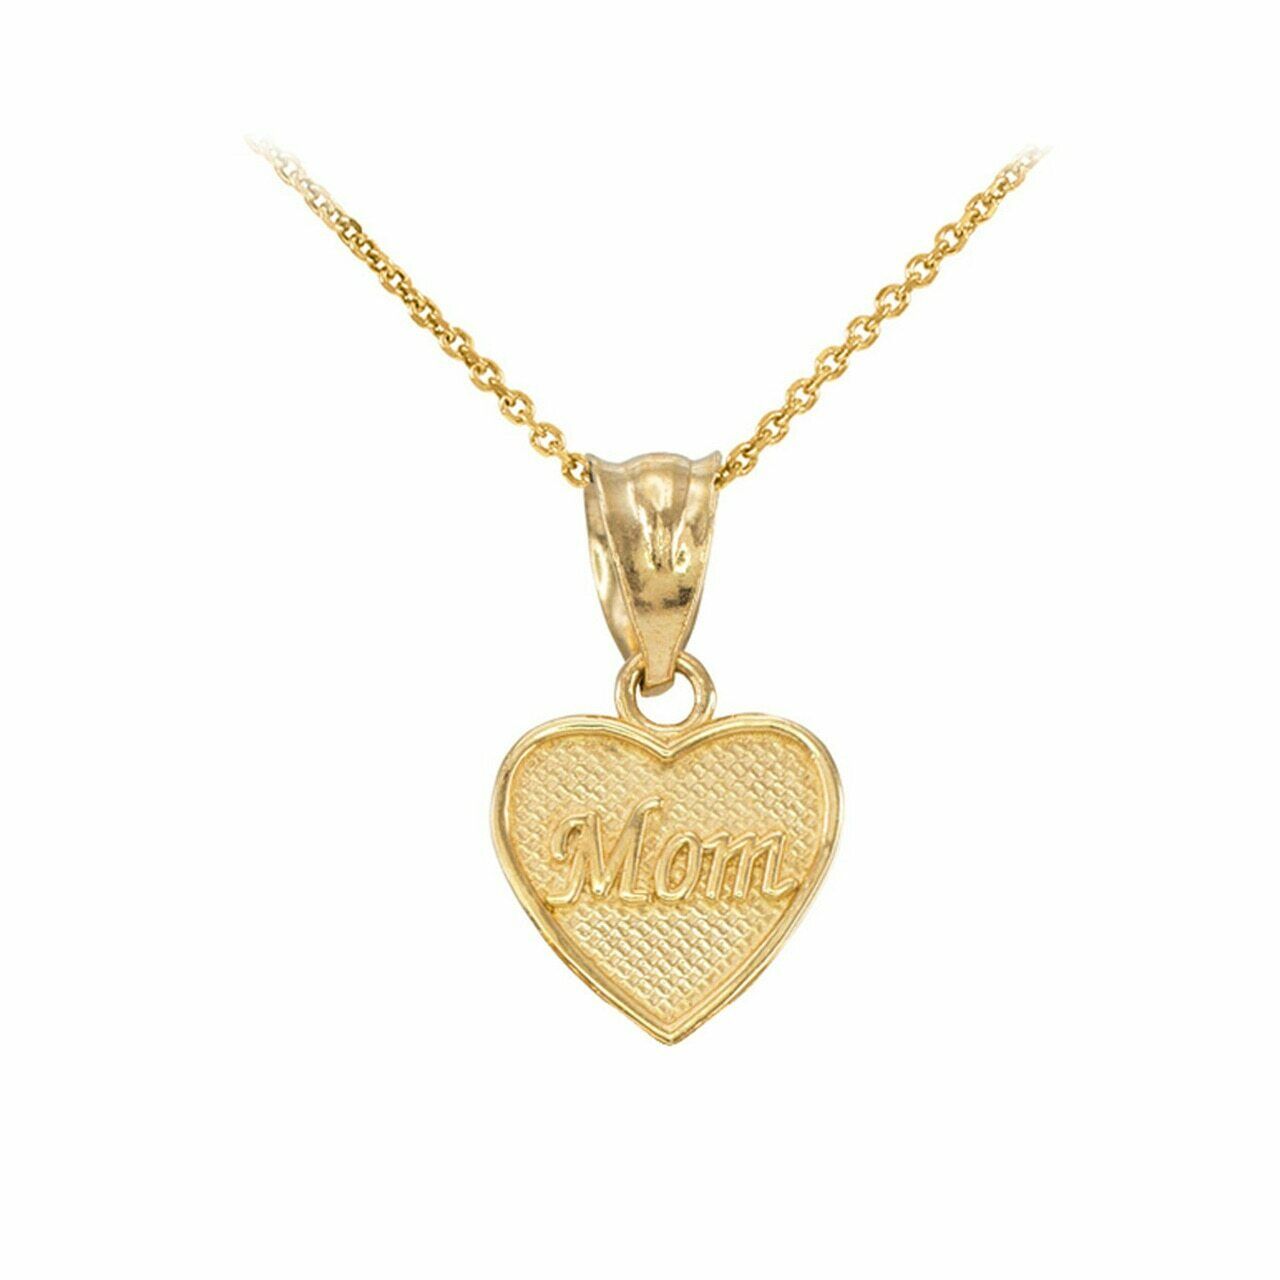 10k Solid Yellow Gold Mini Small Engraved "Mom" Heart Pendant Charm Necklace